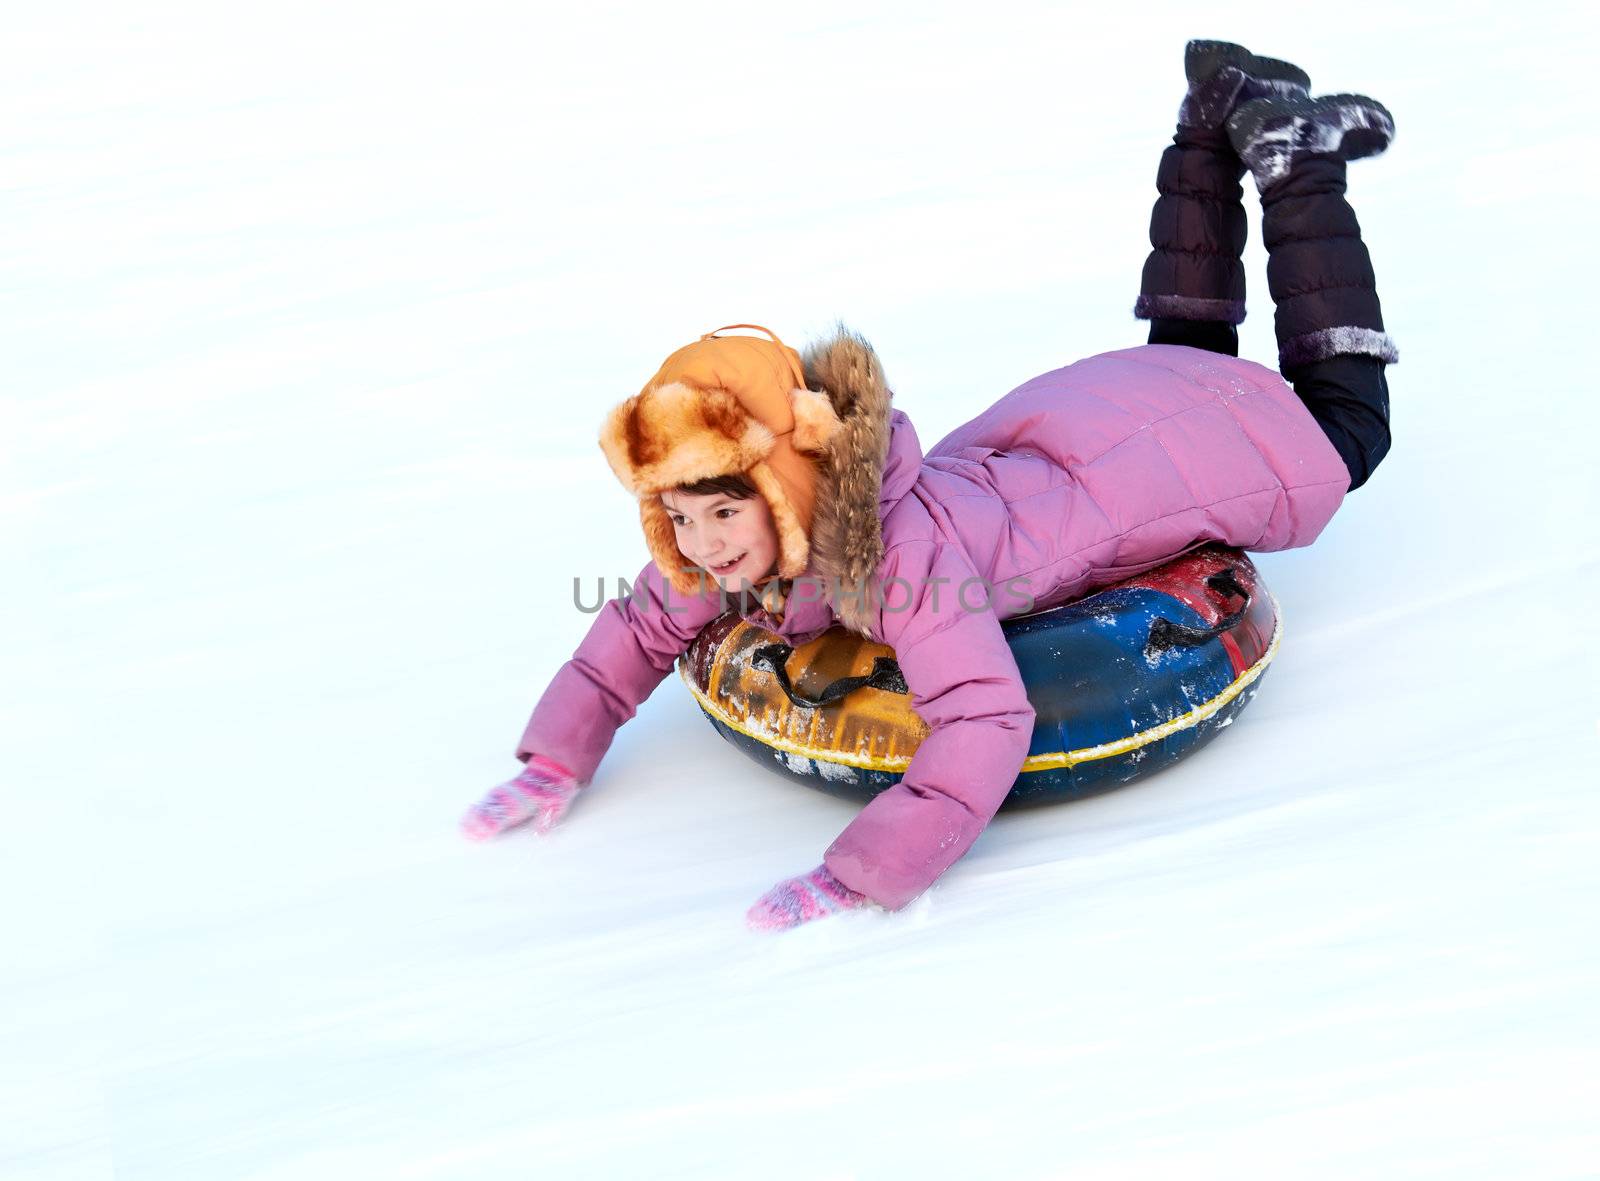 child riding color covered inner tube down snow cover hill at speed